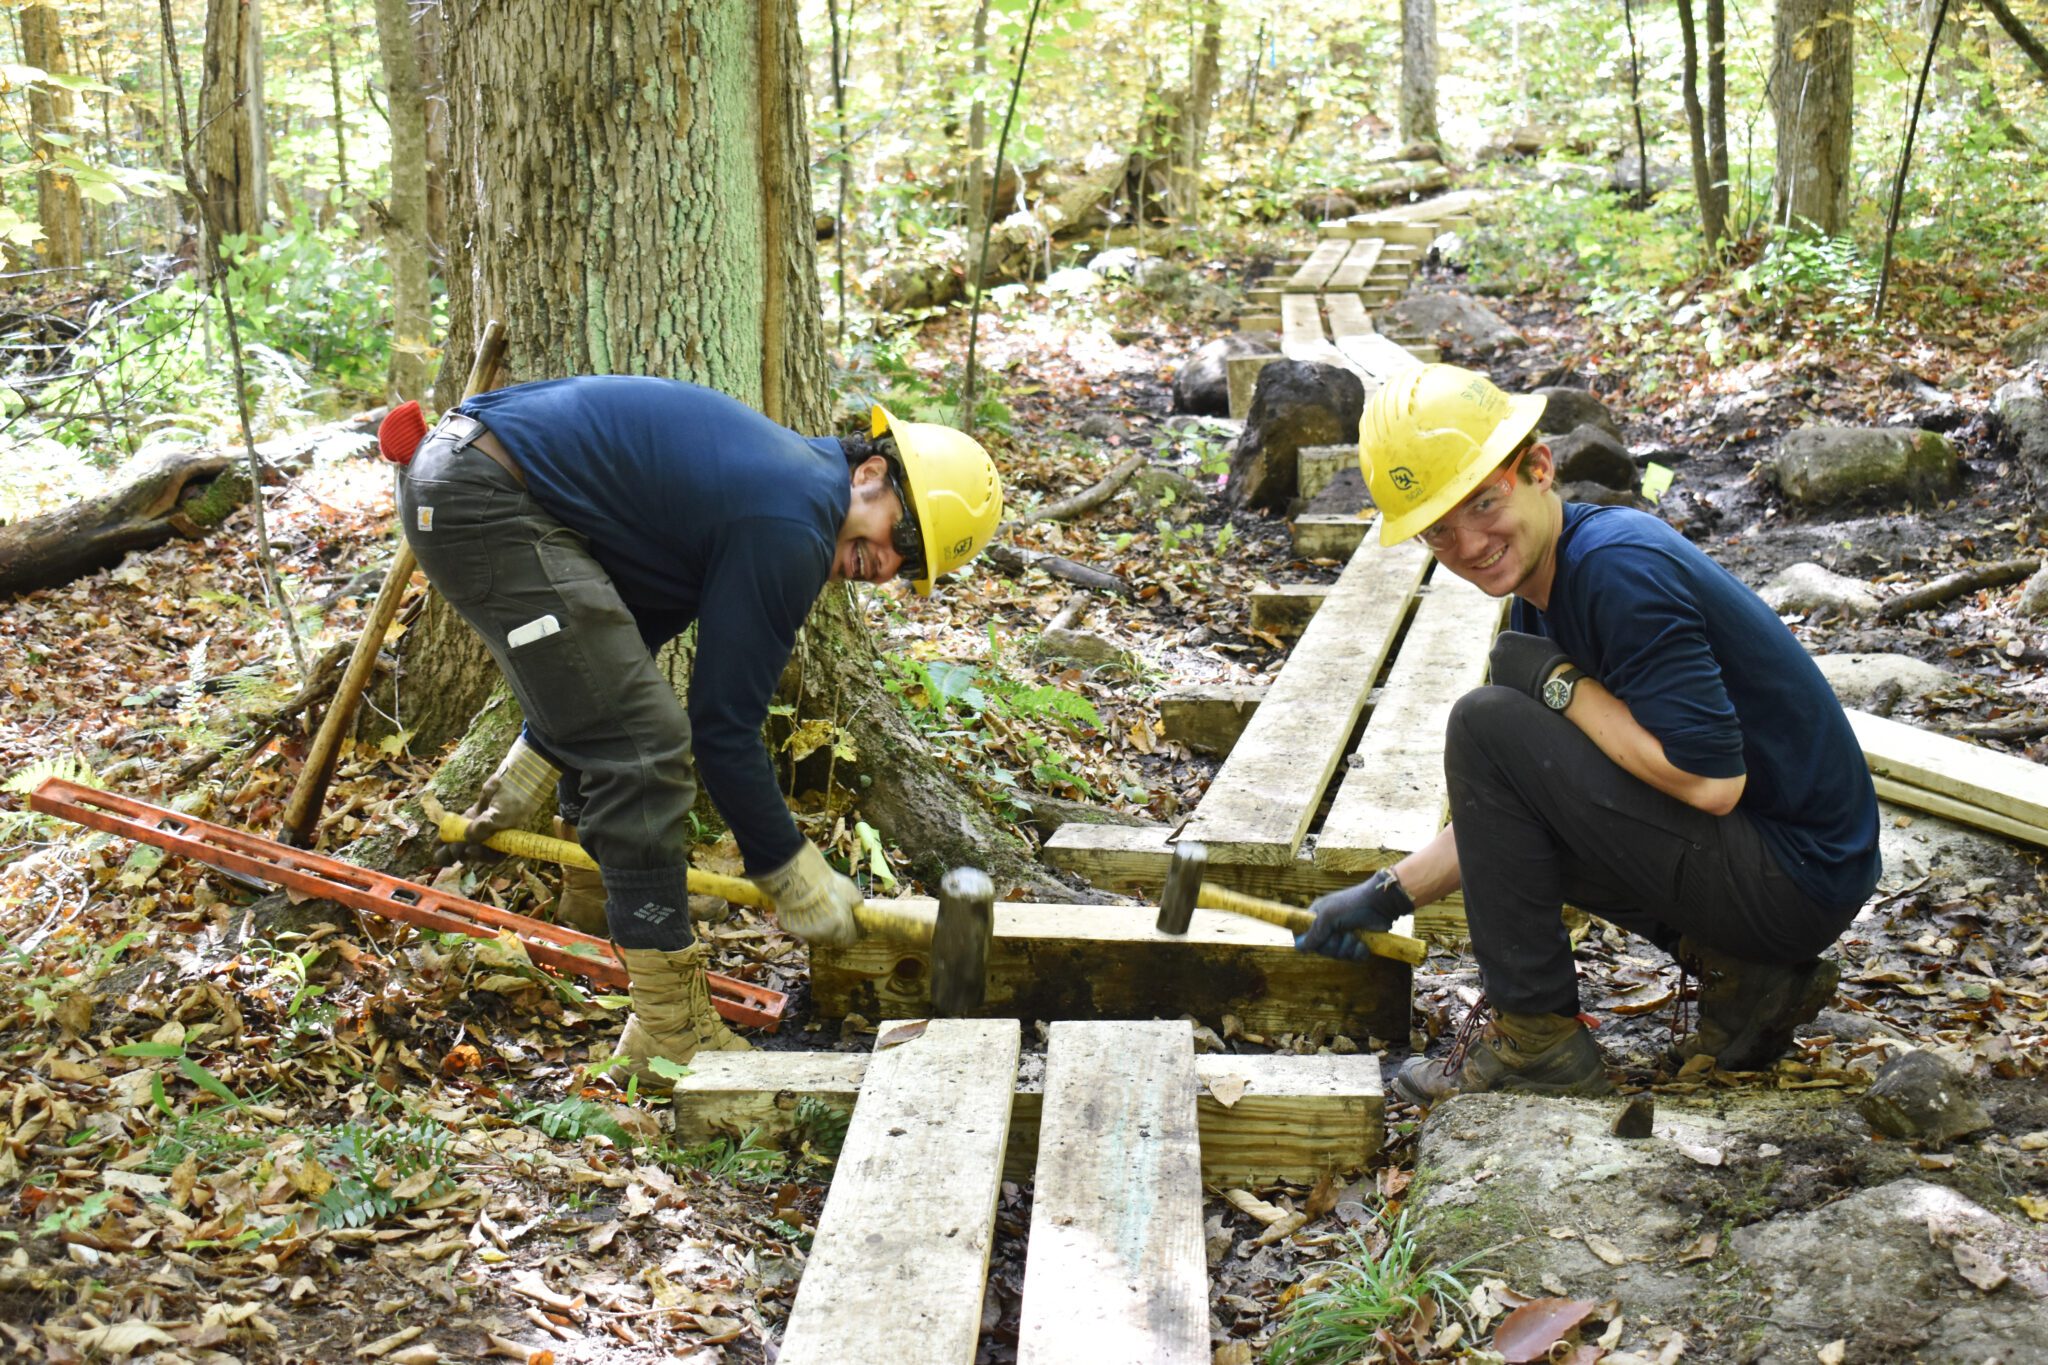 Two members of the Student Protection Society crew work on a pedestrian bridge